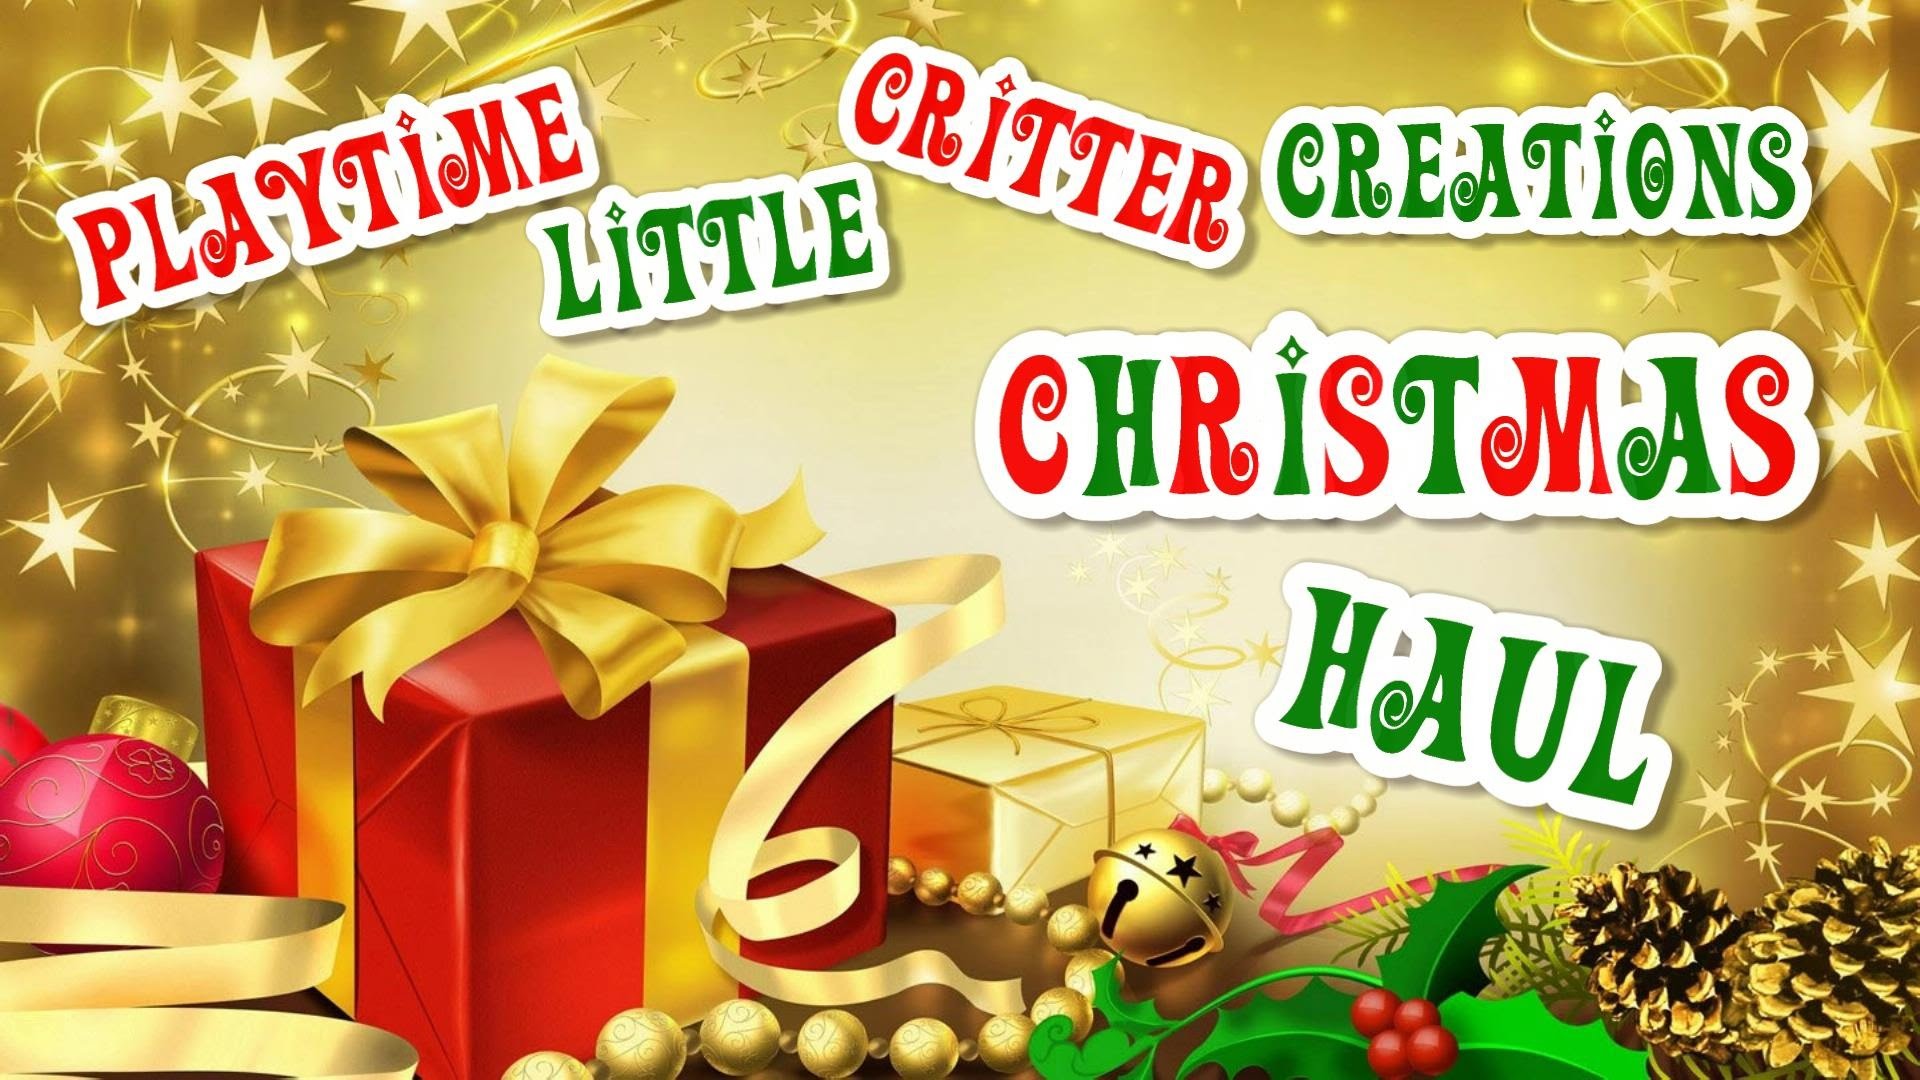 1920x1080 Playtime Little Critter Creations CHRISTMAS Guinea Pig 2014 HAUL!